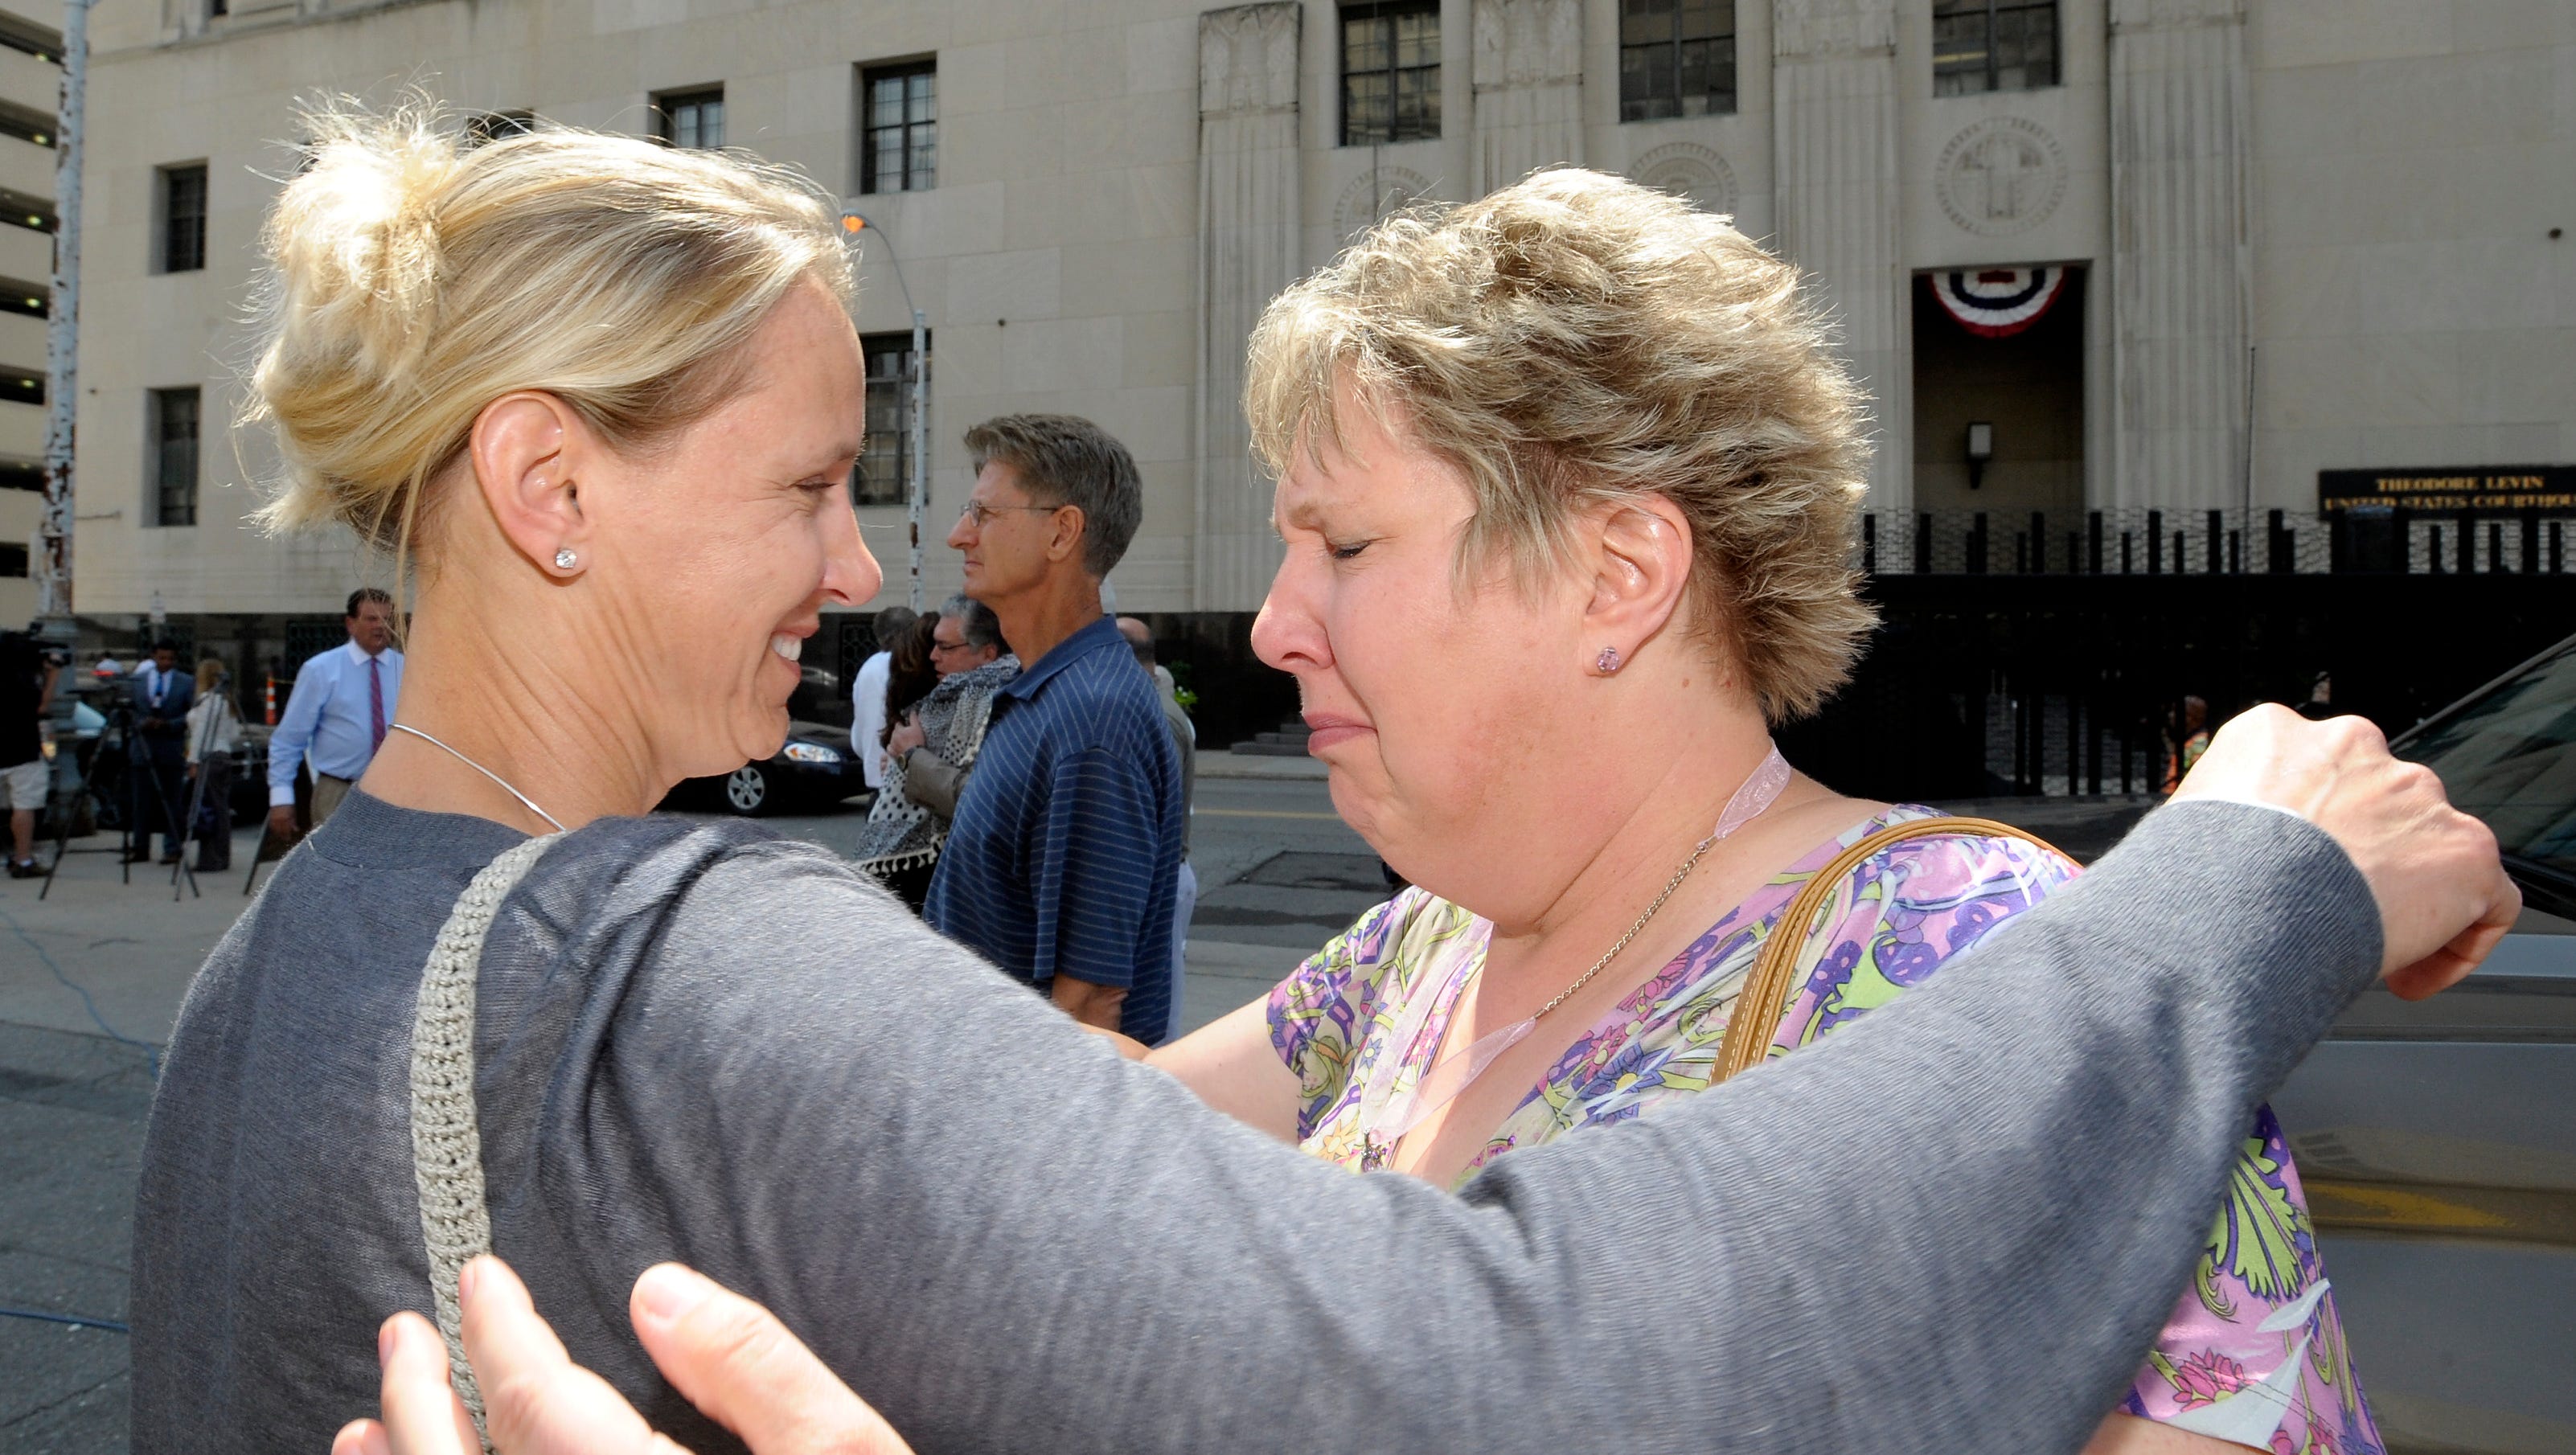 Janice Kosman, left, 46, of Washington, D.C., hugs her sister, Vickie Harrington, 55, of Ray Township. Their sister, Barbara Globie, of Dryden, died at the hand of Dr. Fata.